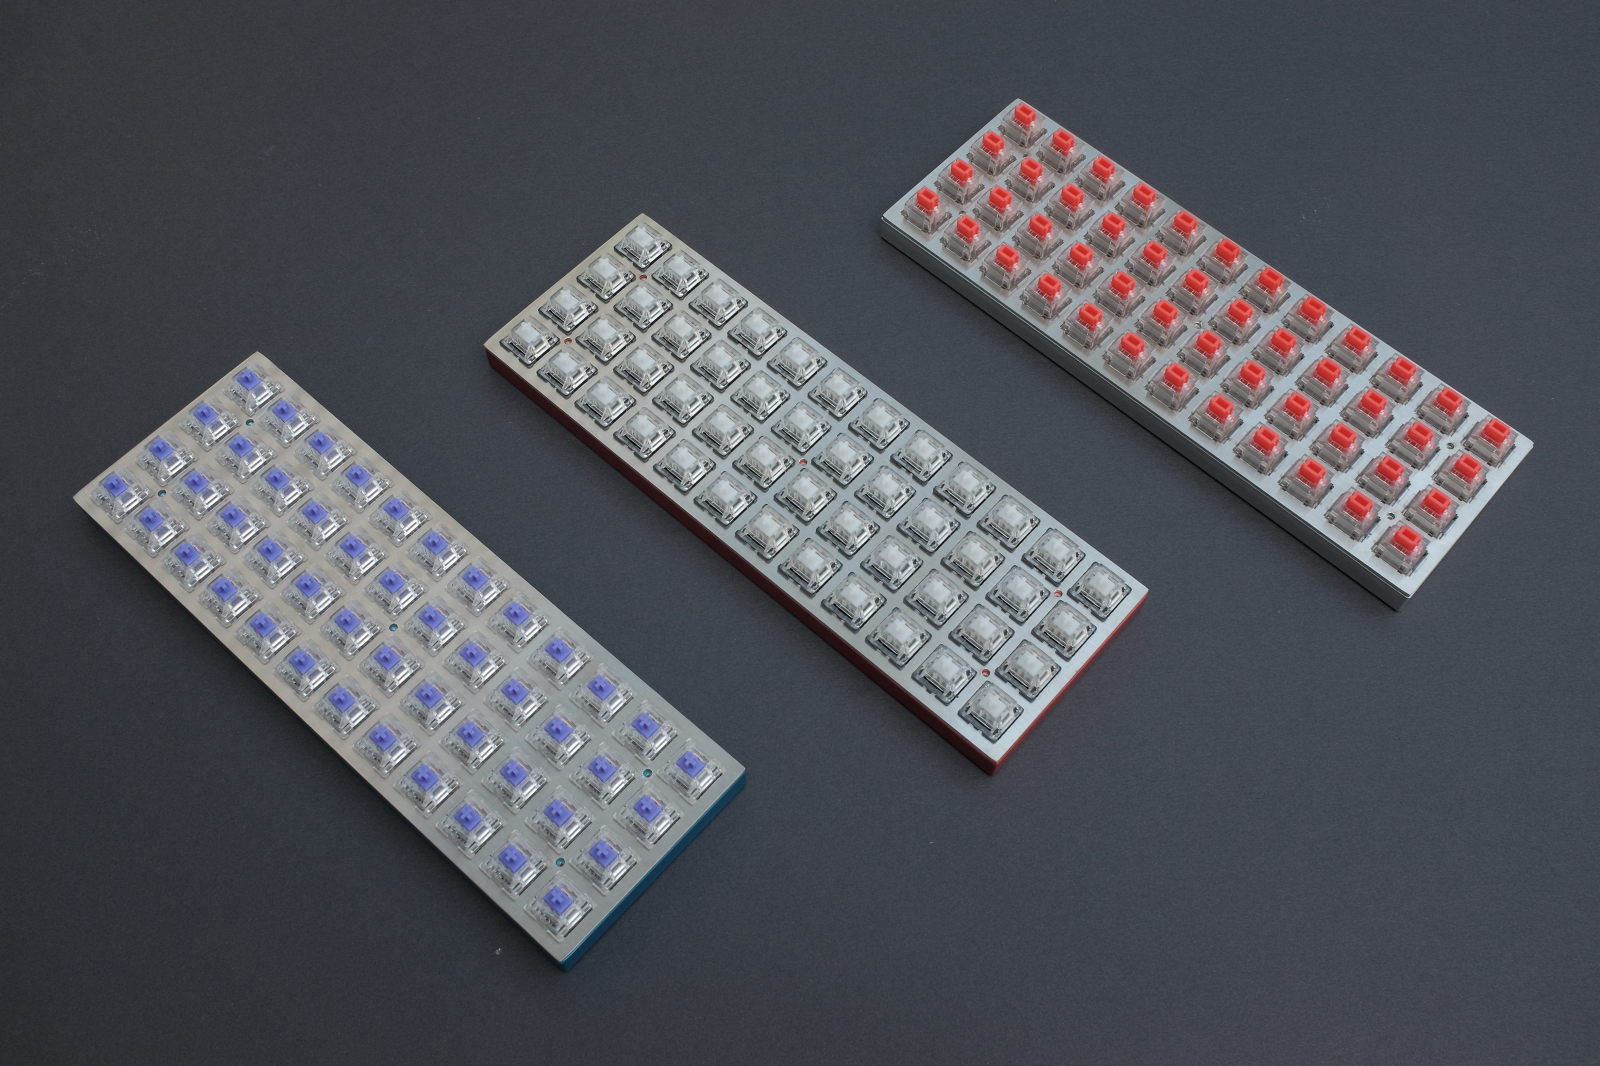 Plancks with Zealios</span> 62g Tactile, Gateron 35g Linear Clear and Mathias 35g Linear Red key switches